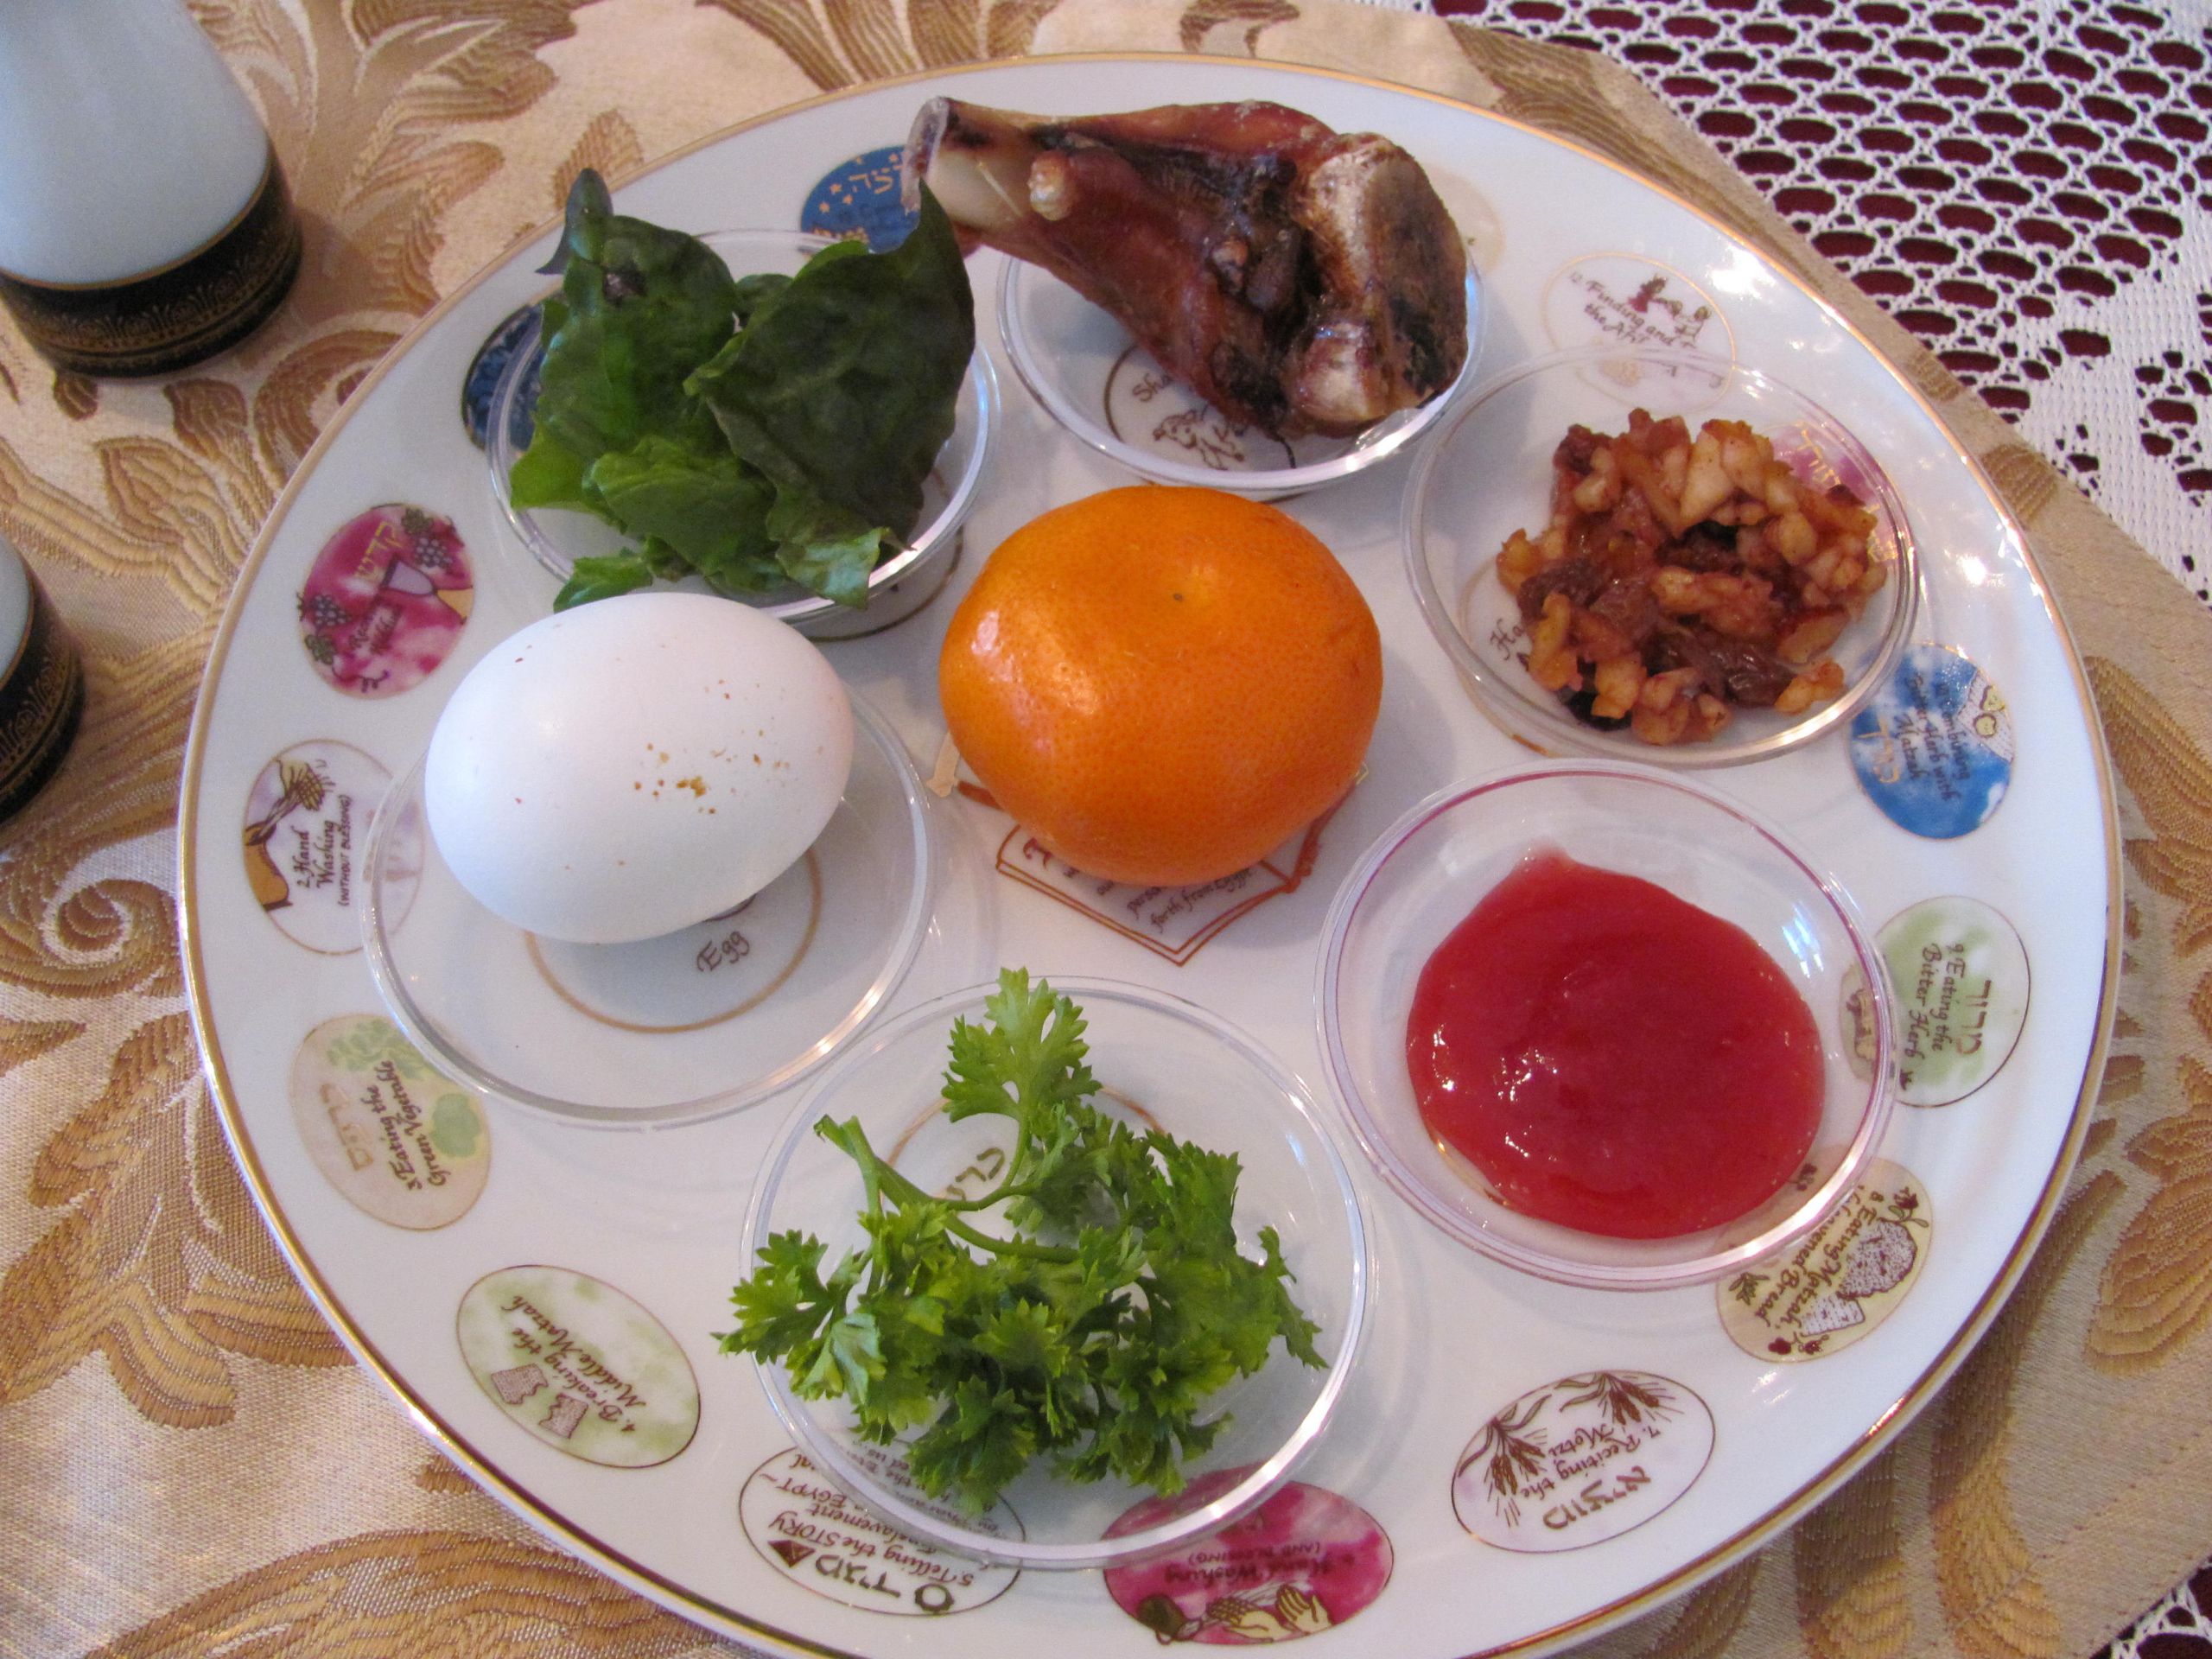 Passover Food
 Passover Seder Prayers and The Meaning of the Seder Foods